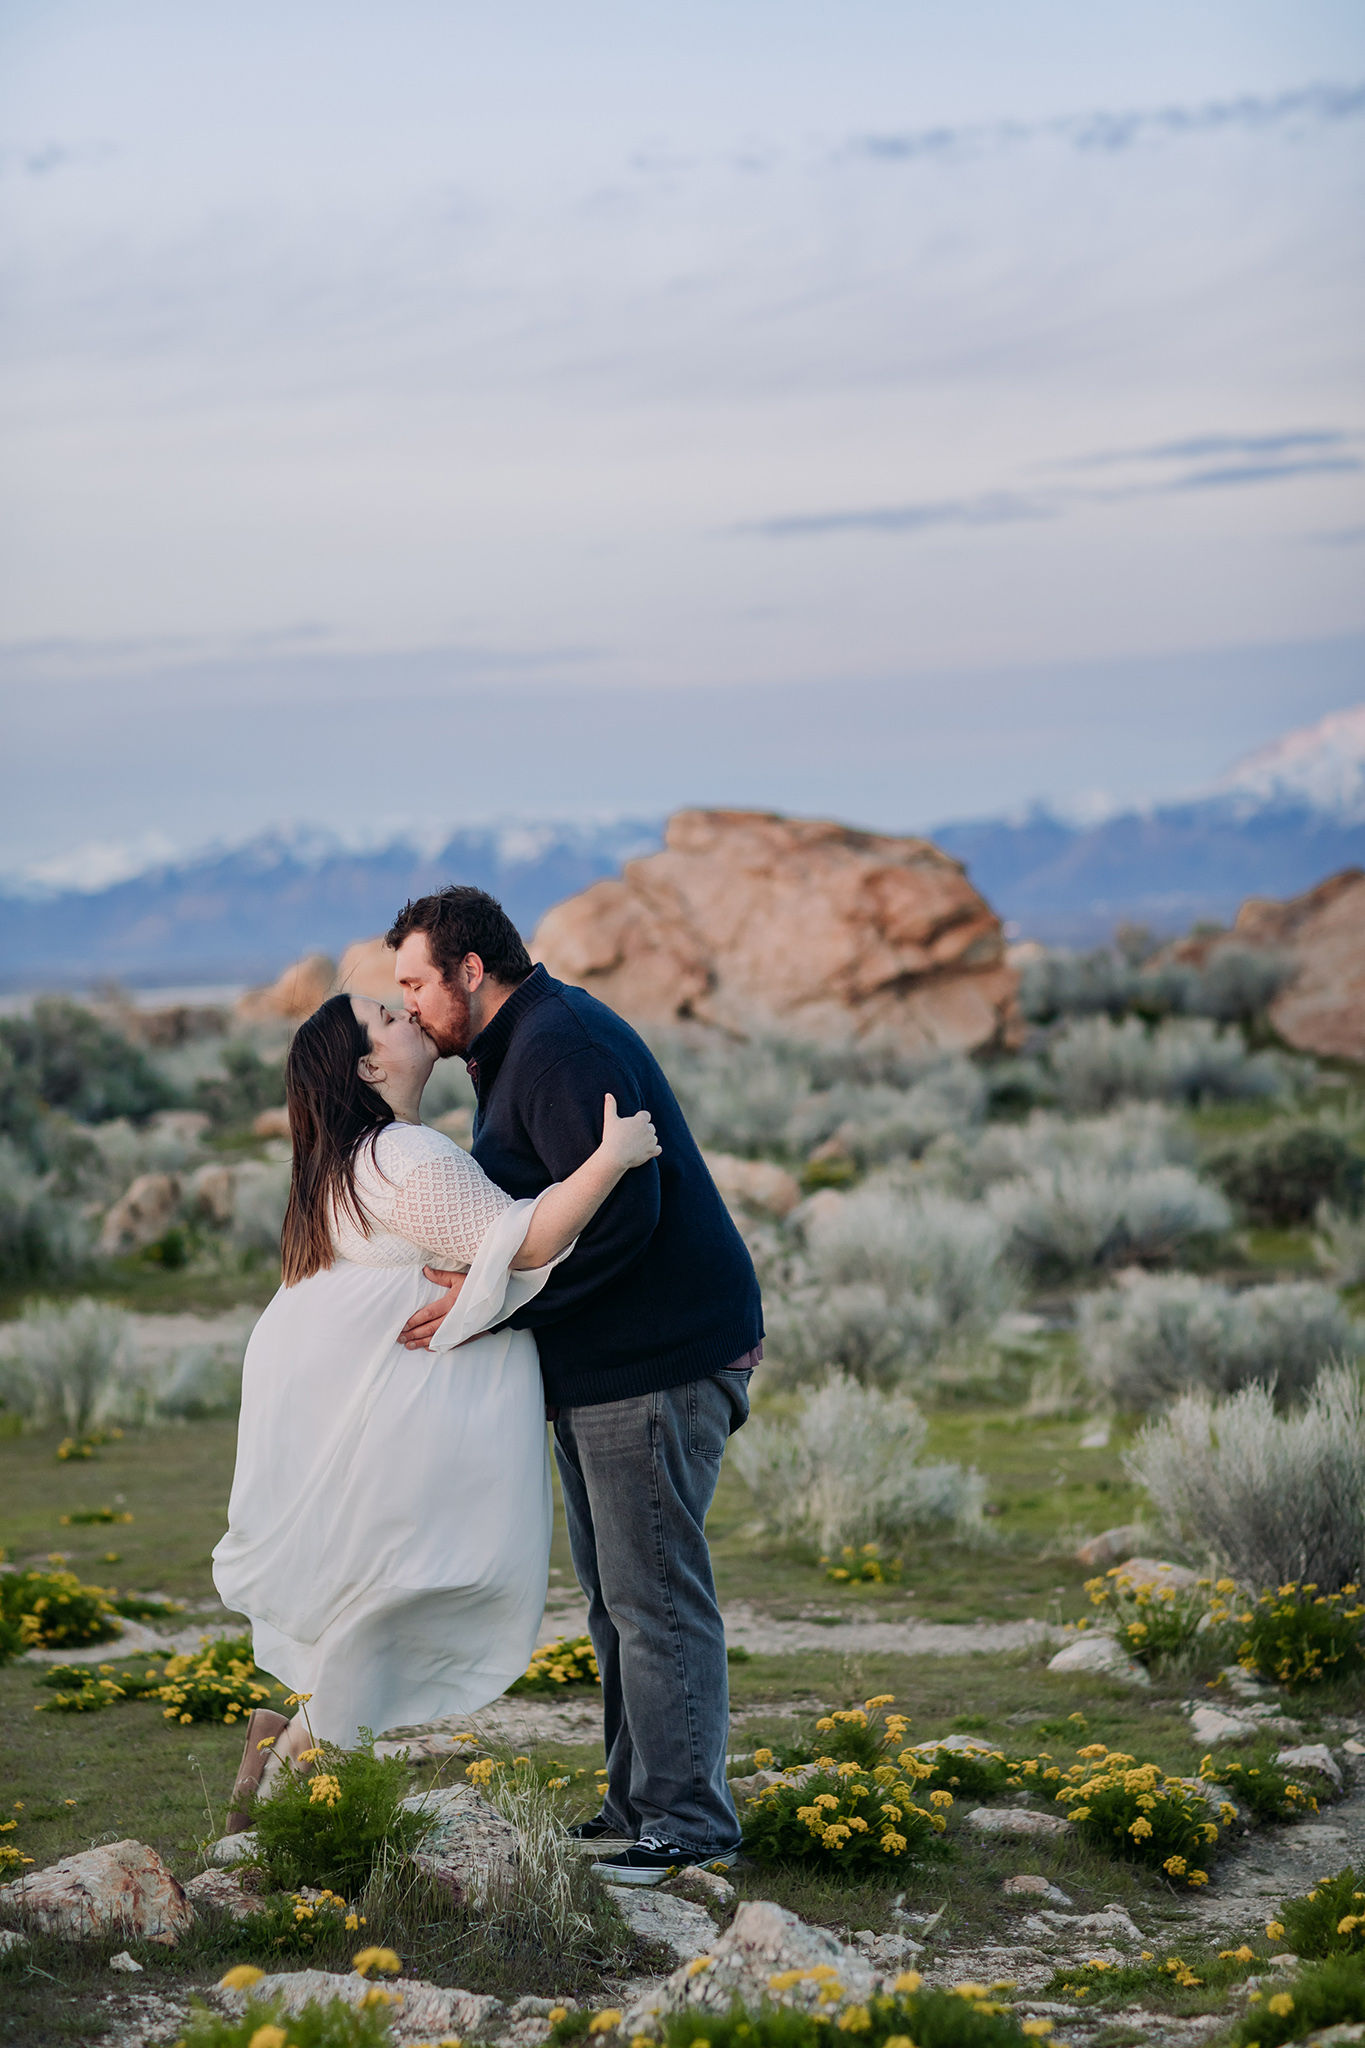 Breathtaking Buffalo Point Utah couples portraits in Spring. Exploring Utah with ENV Photography.